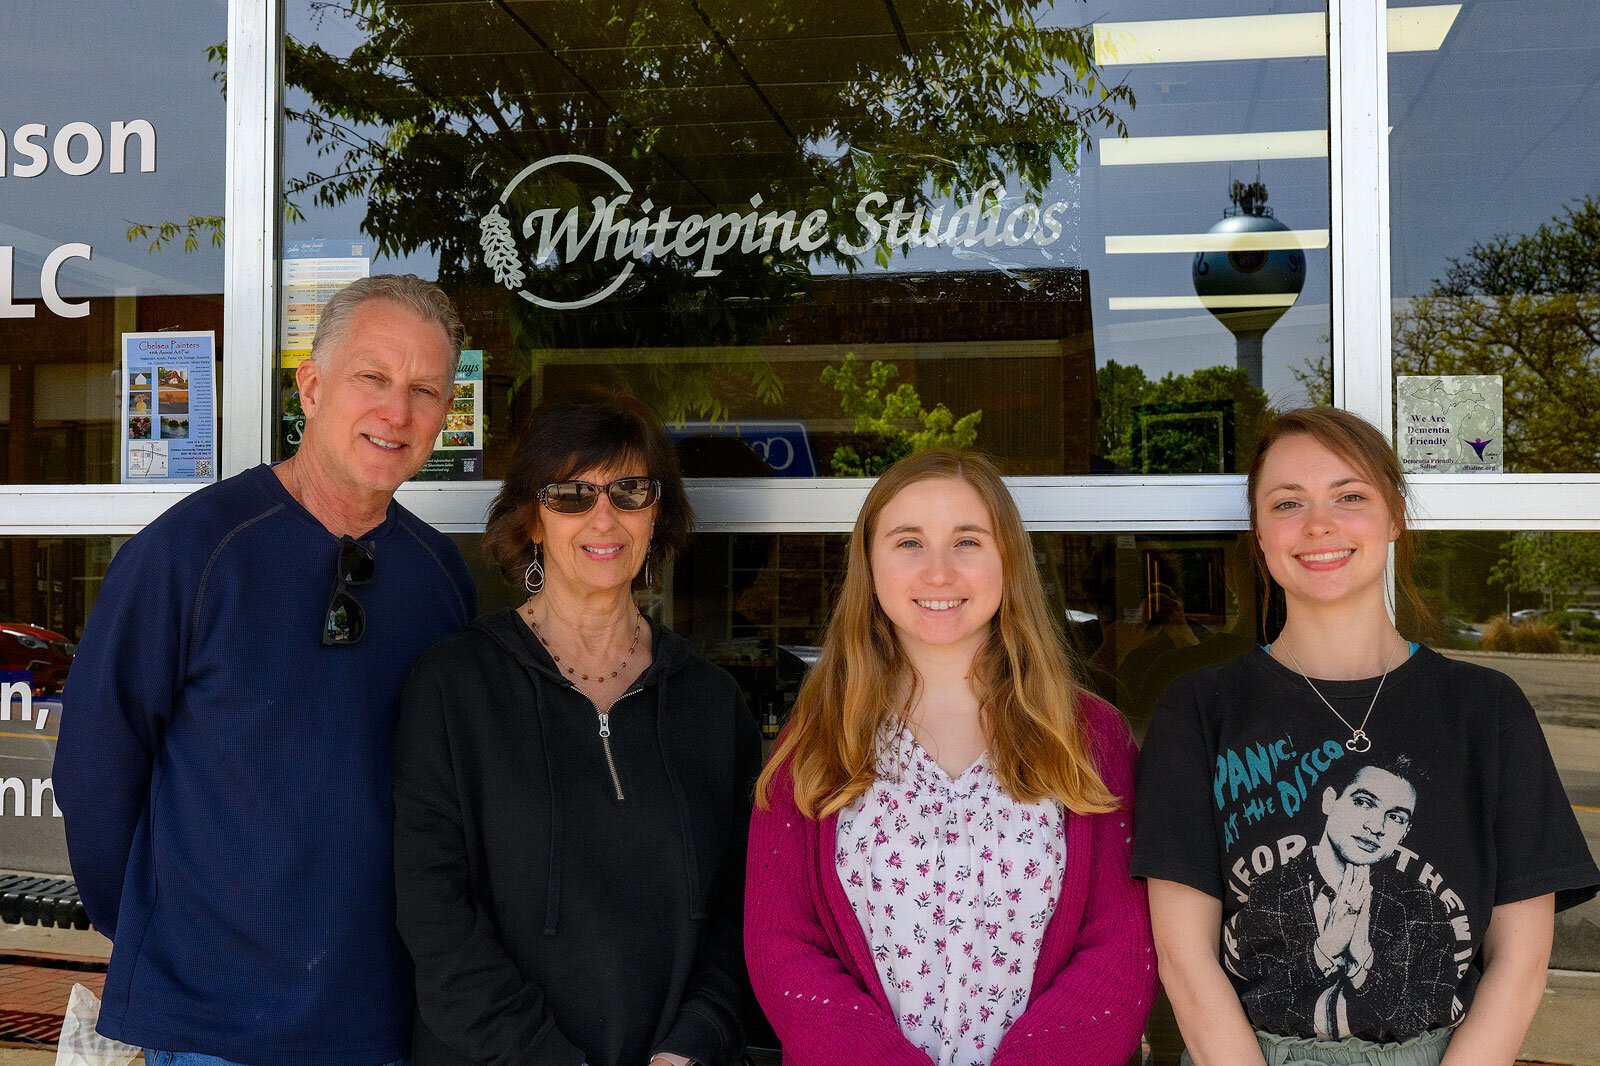 Randy Dence, Joanne Dence, Hollyann Stewart, and Kaili Dence at the current location of Whitepine Studios.